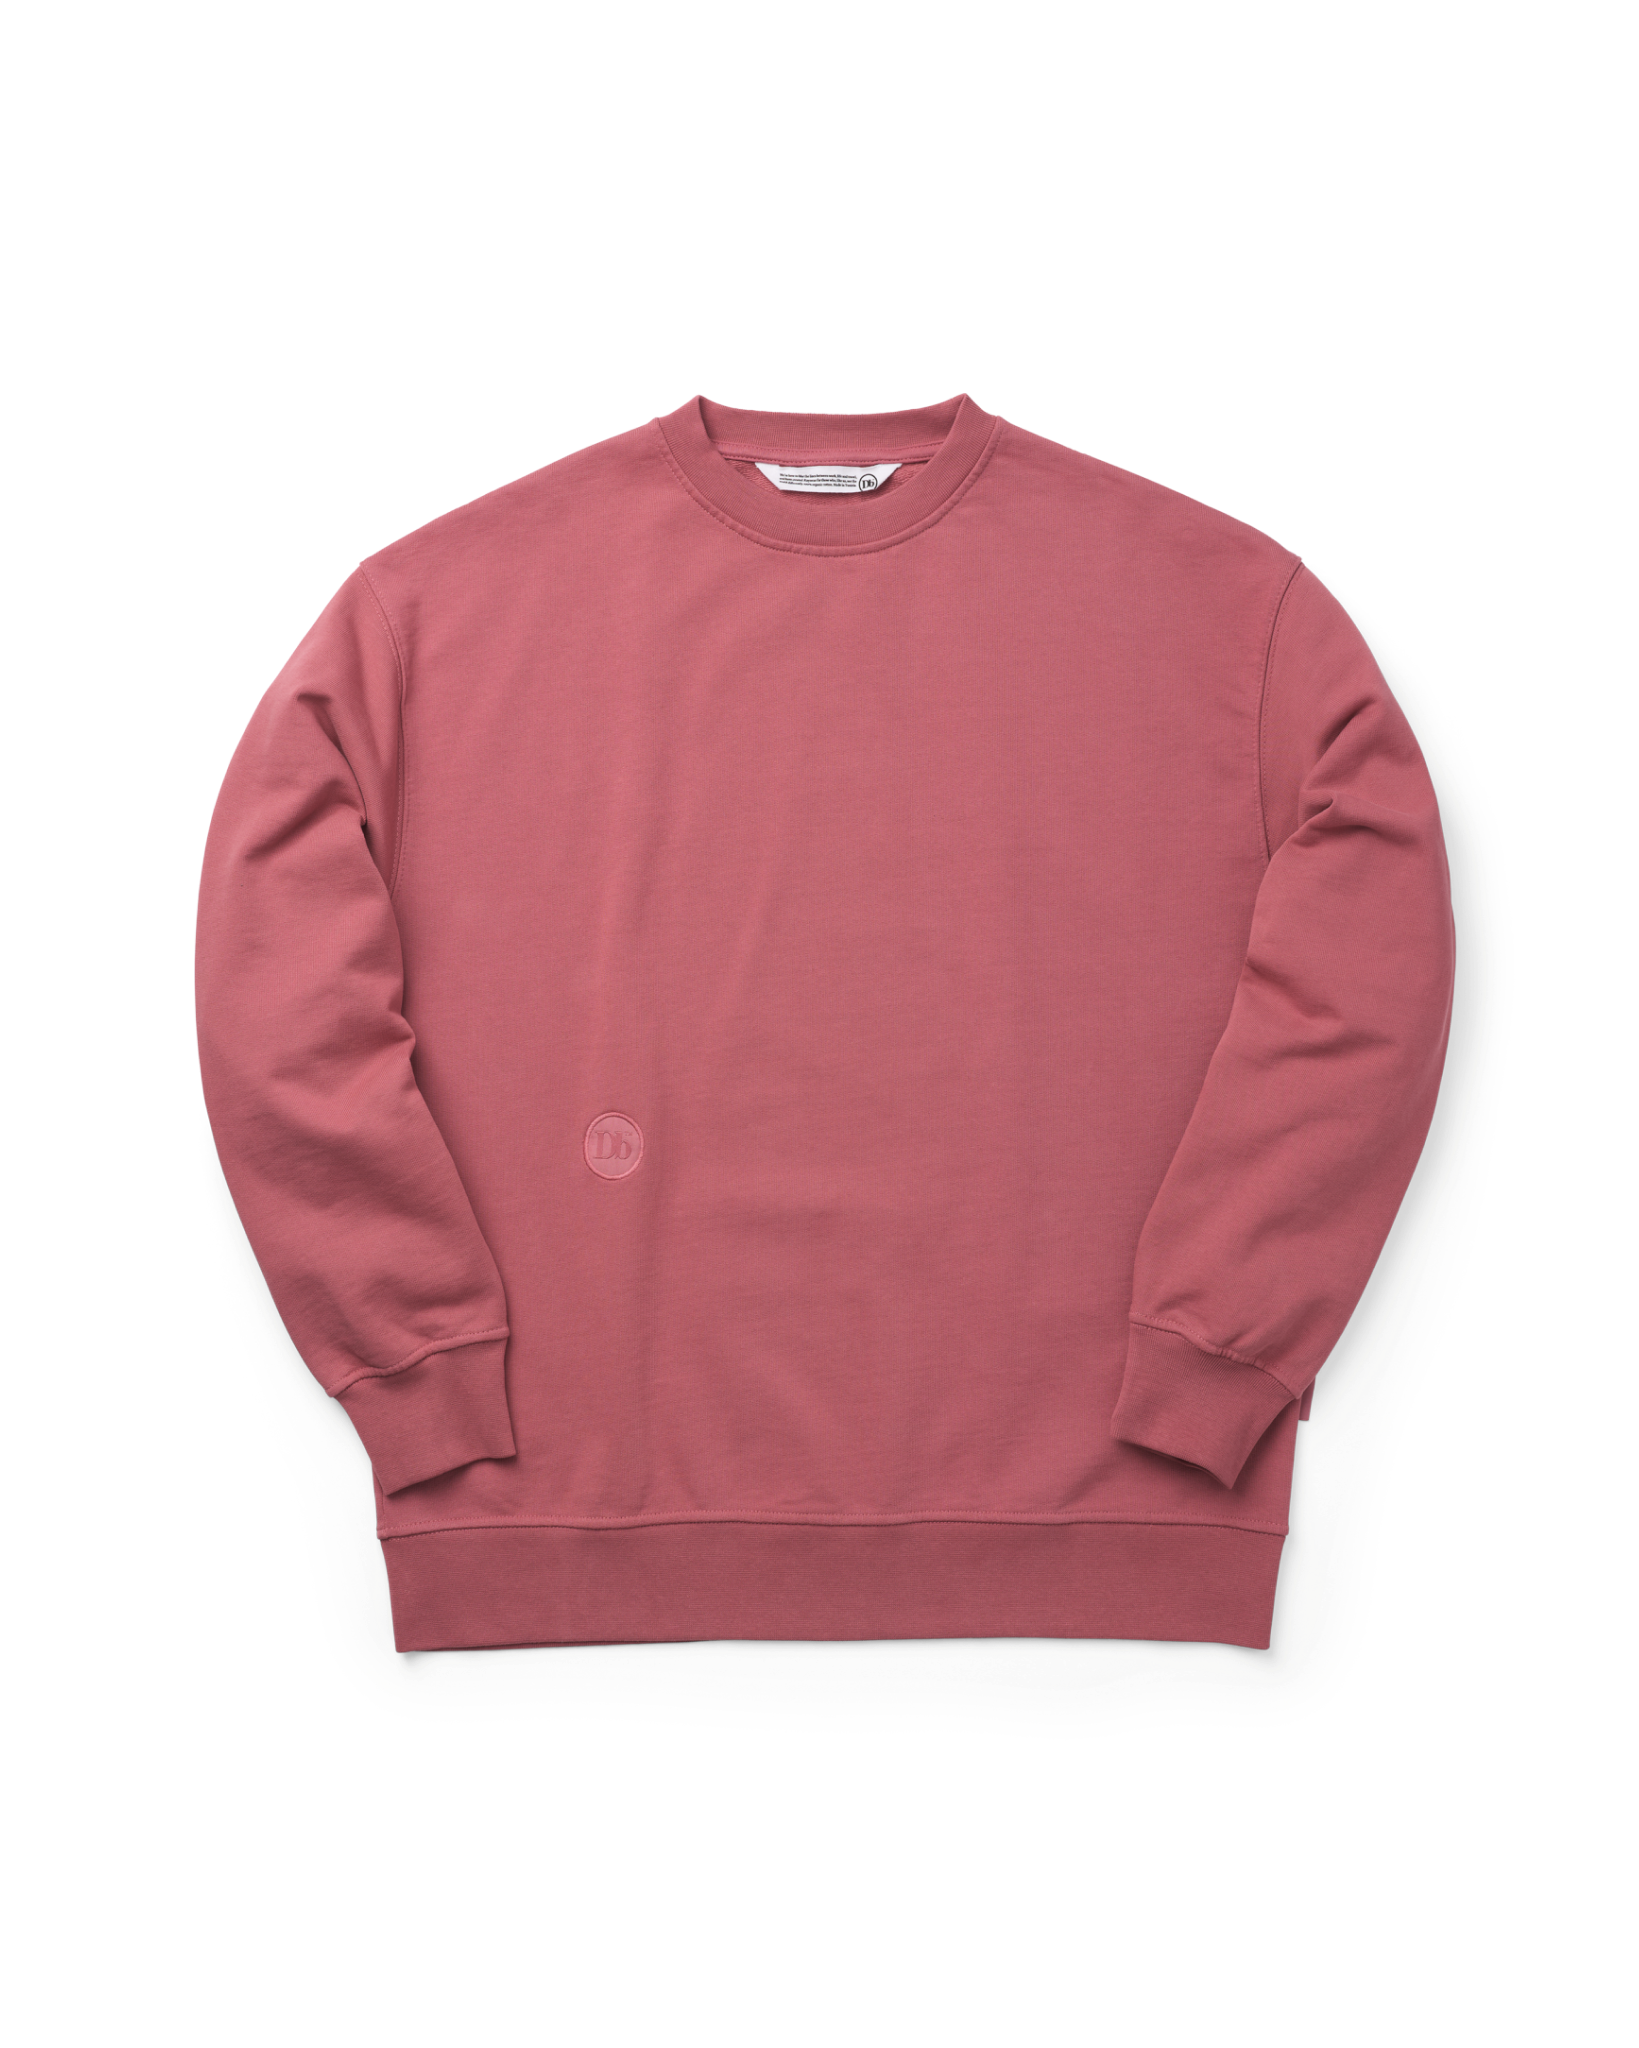 Anywear Crewneck Sunbleached Red - S / Sunbleached Red